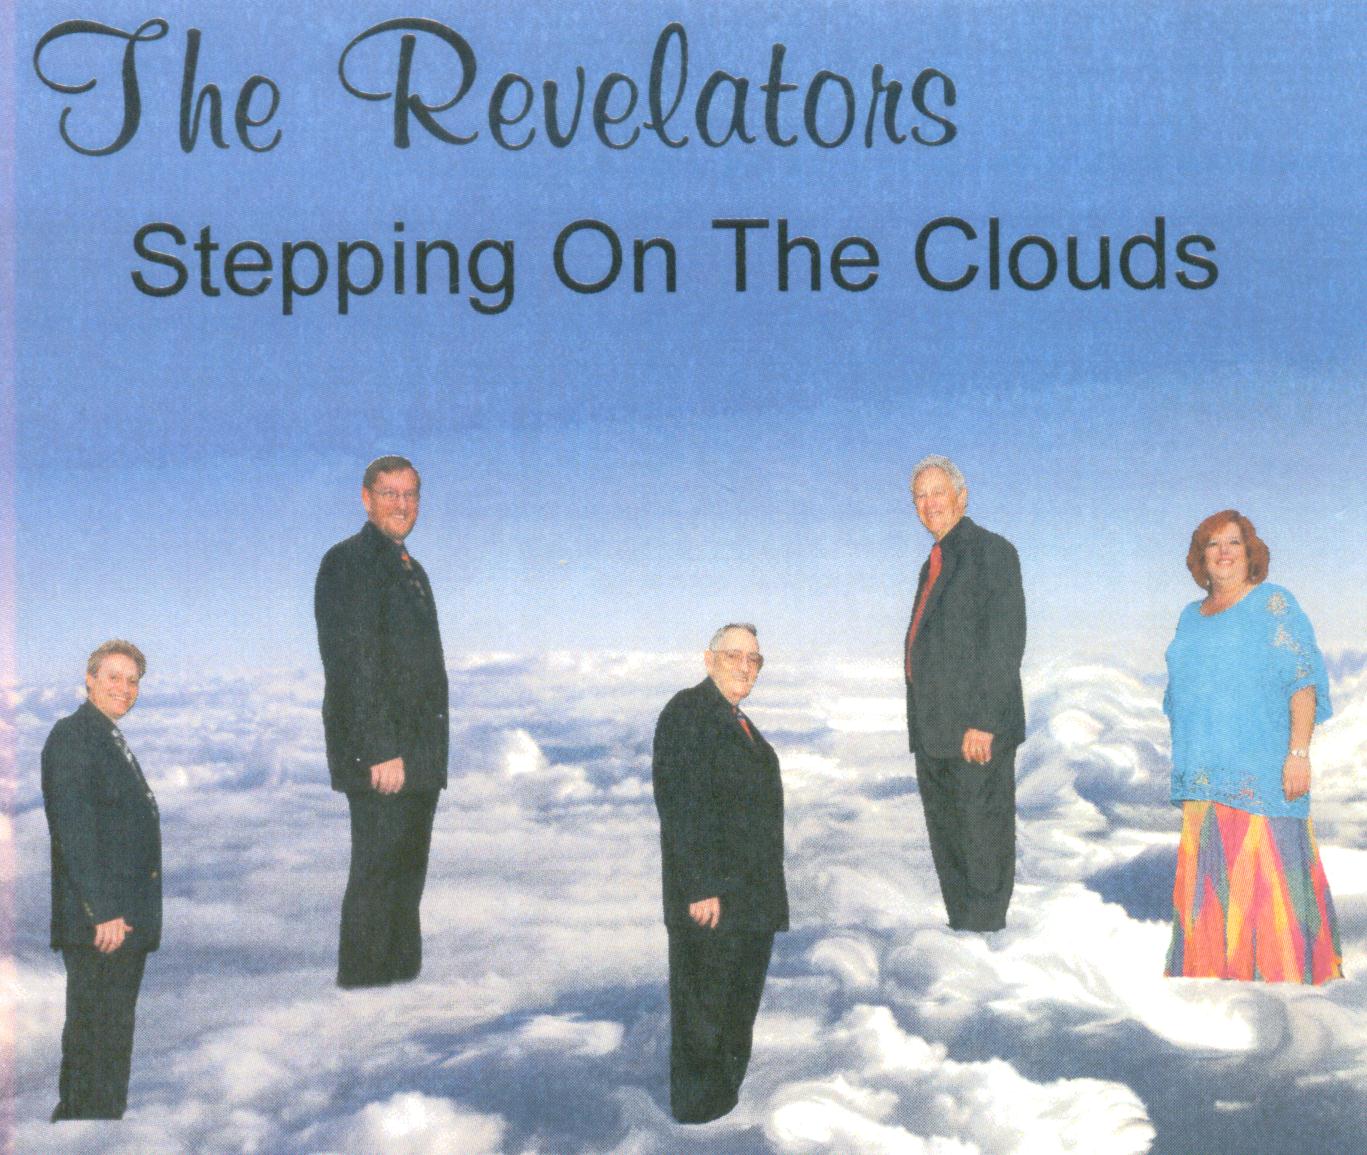 steppingontheclouds.jpg